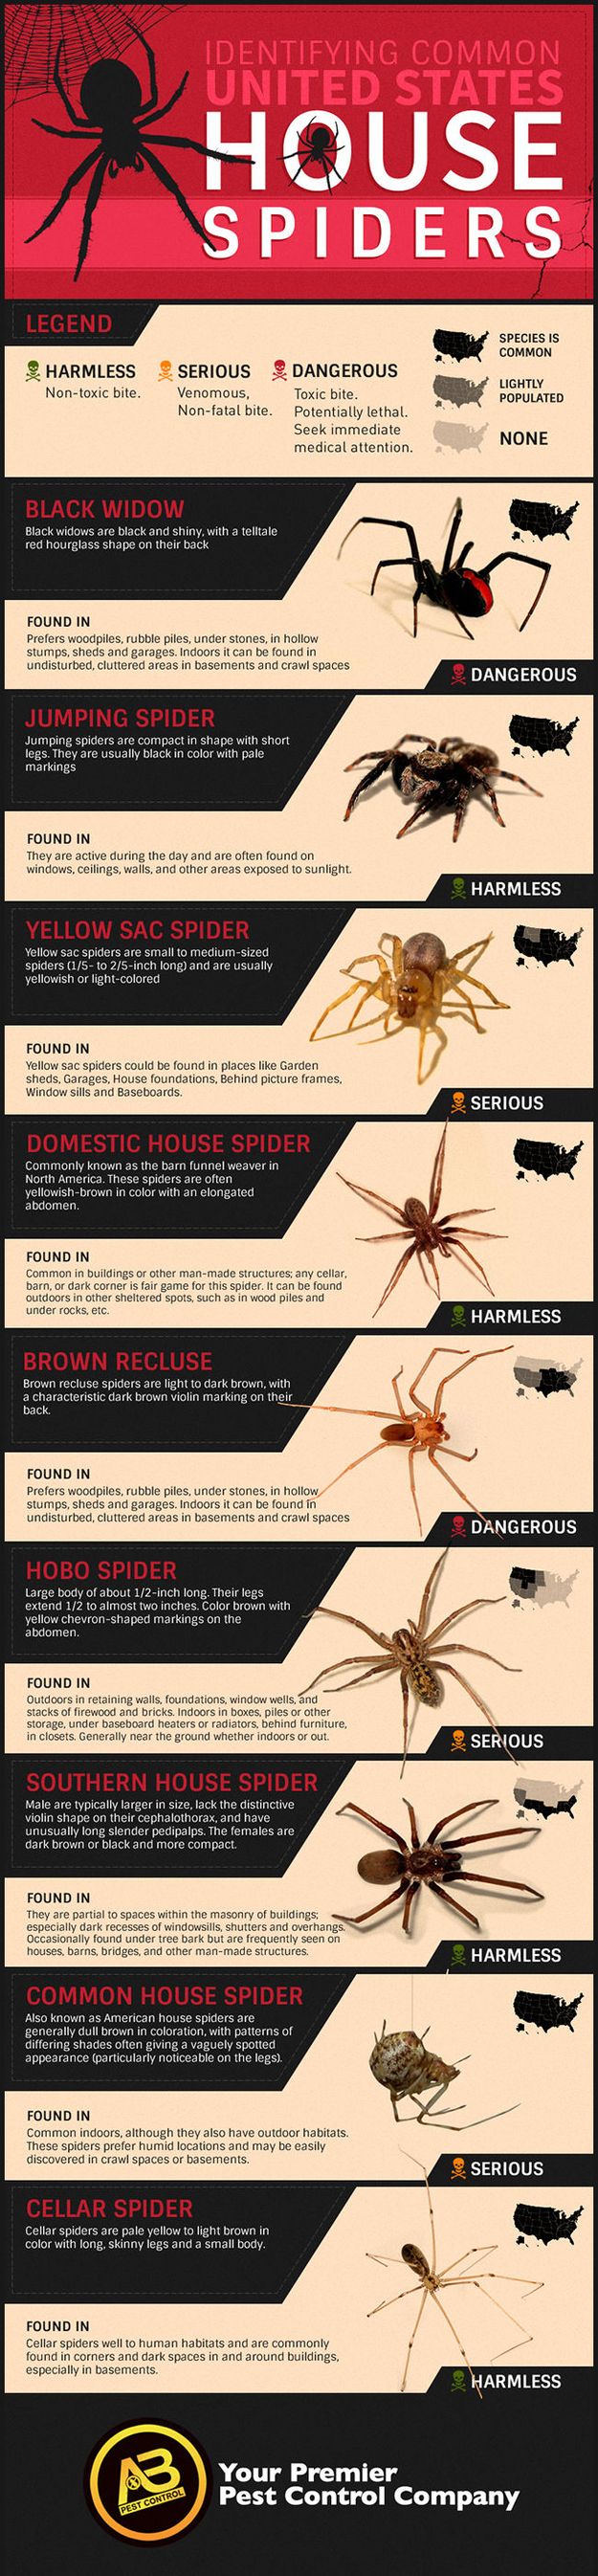 How To Identify Common Poisonous Spiders In Your Home